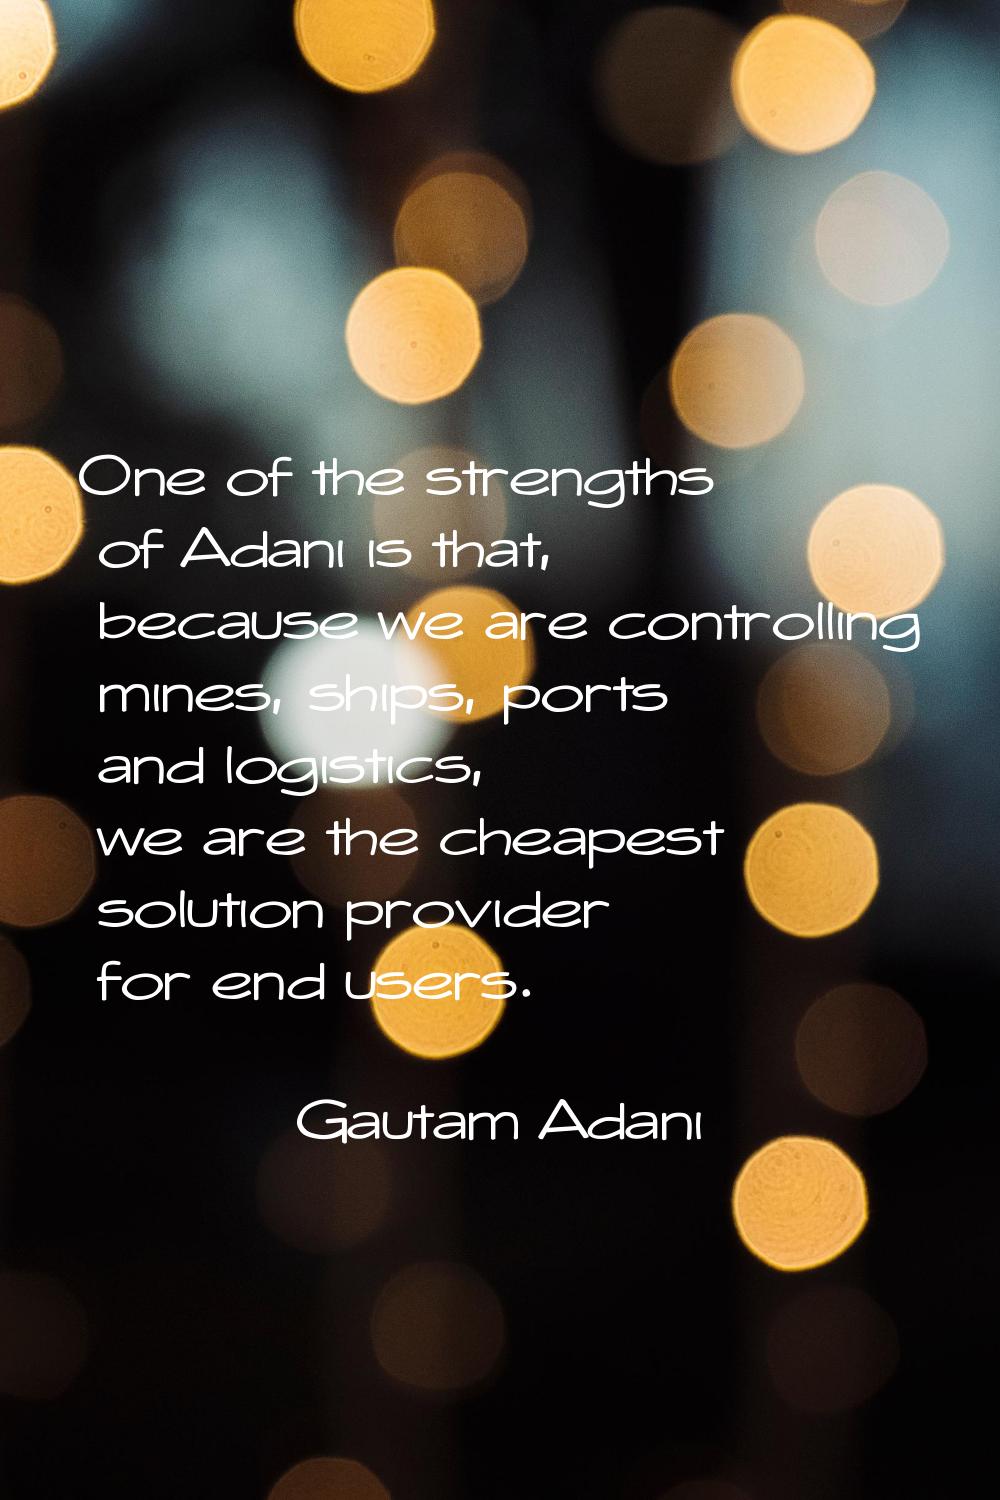 One of the strengths of Adani is that, because we are controlling mines, ships, ports and logistics